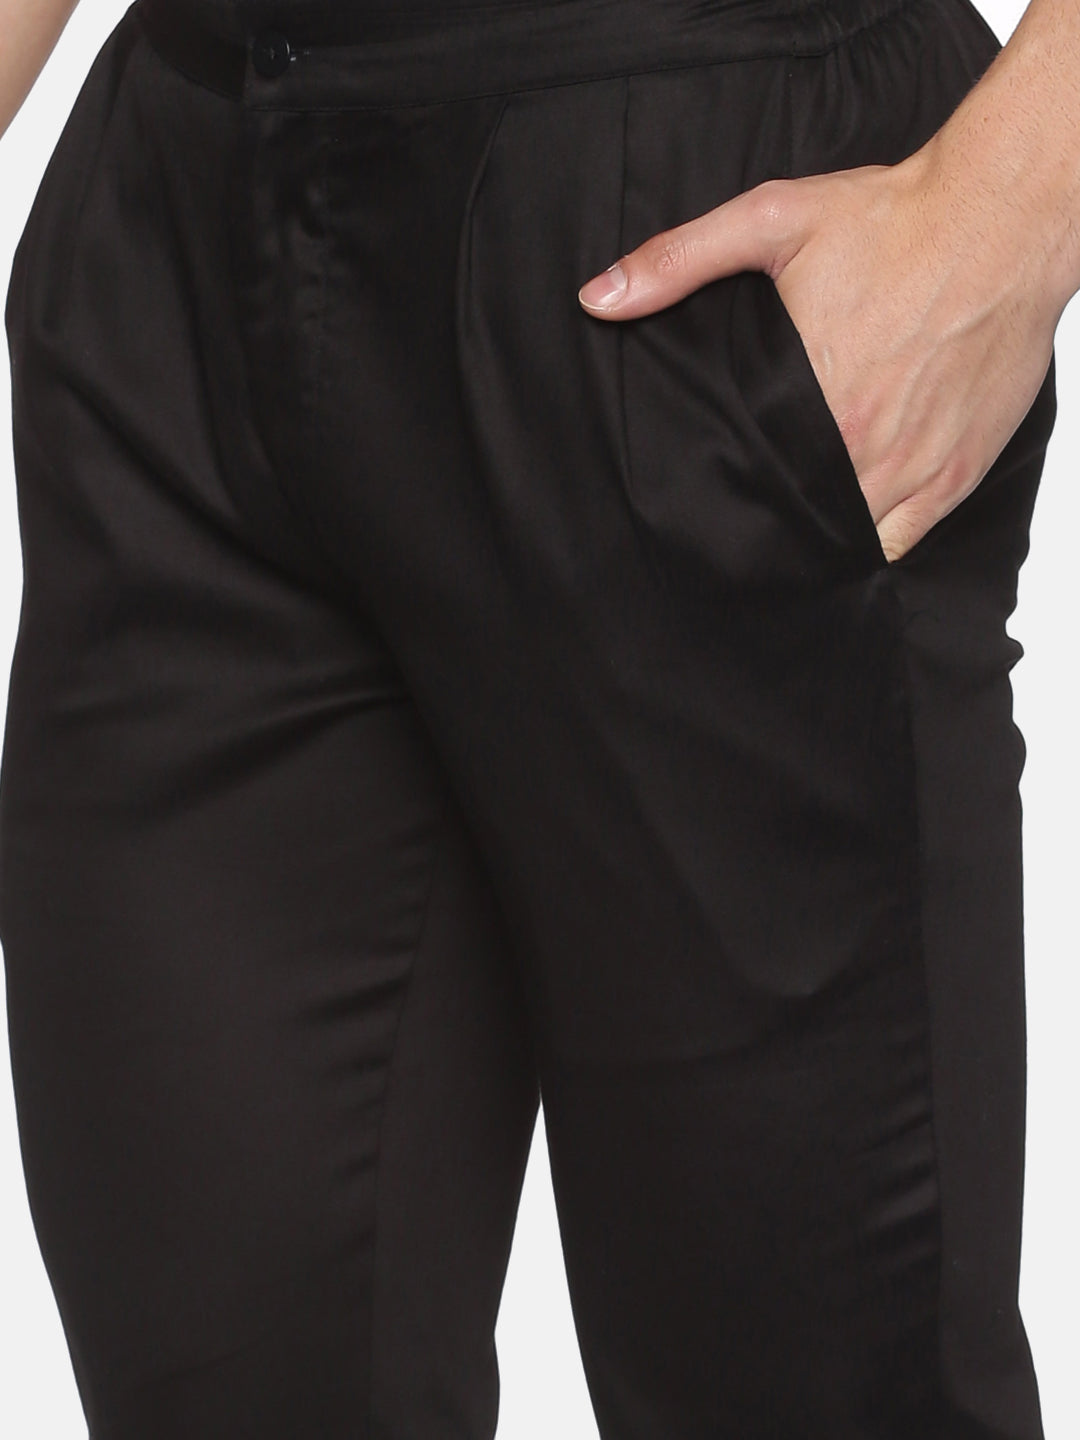 Pack of 2 White & Black Cotton Trousers with Pleated Front